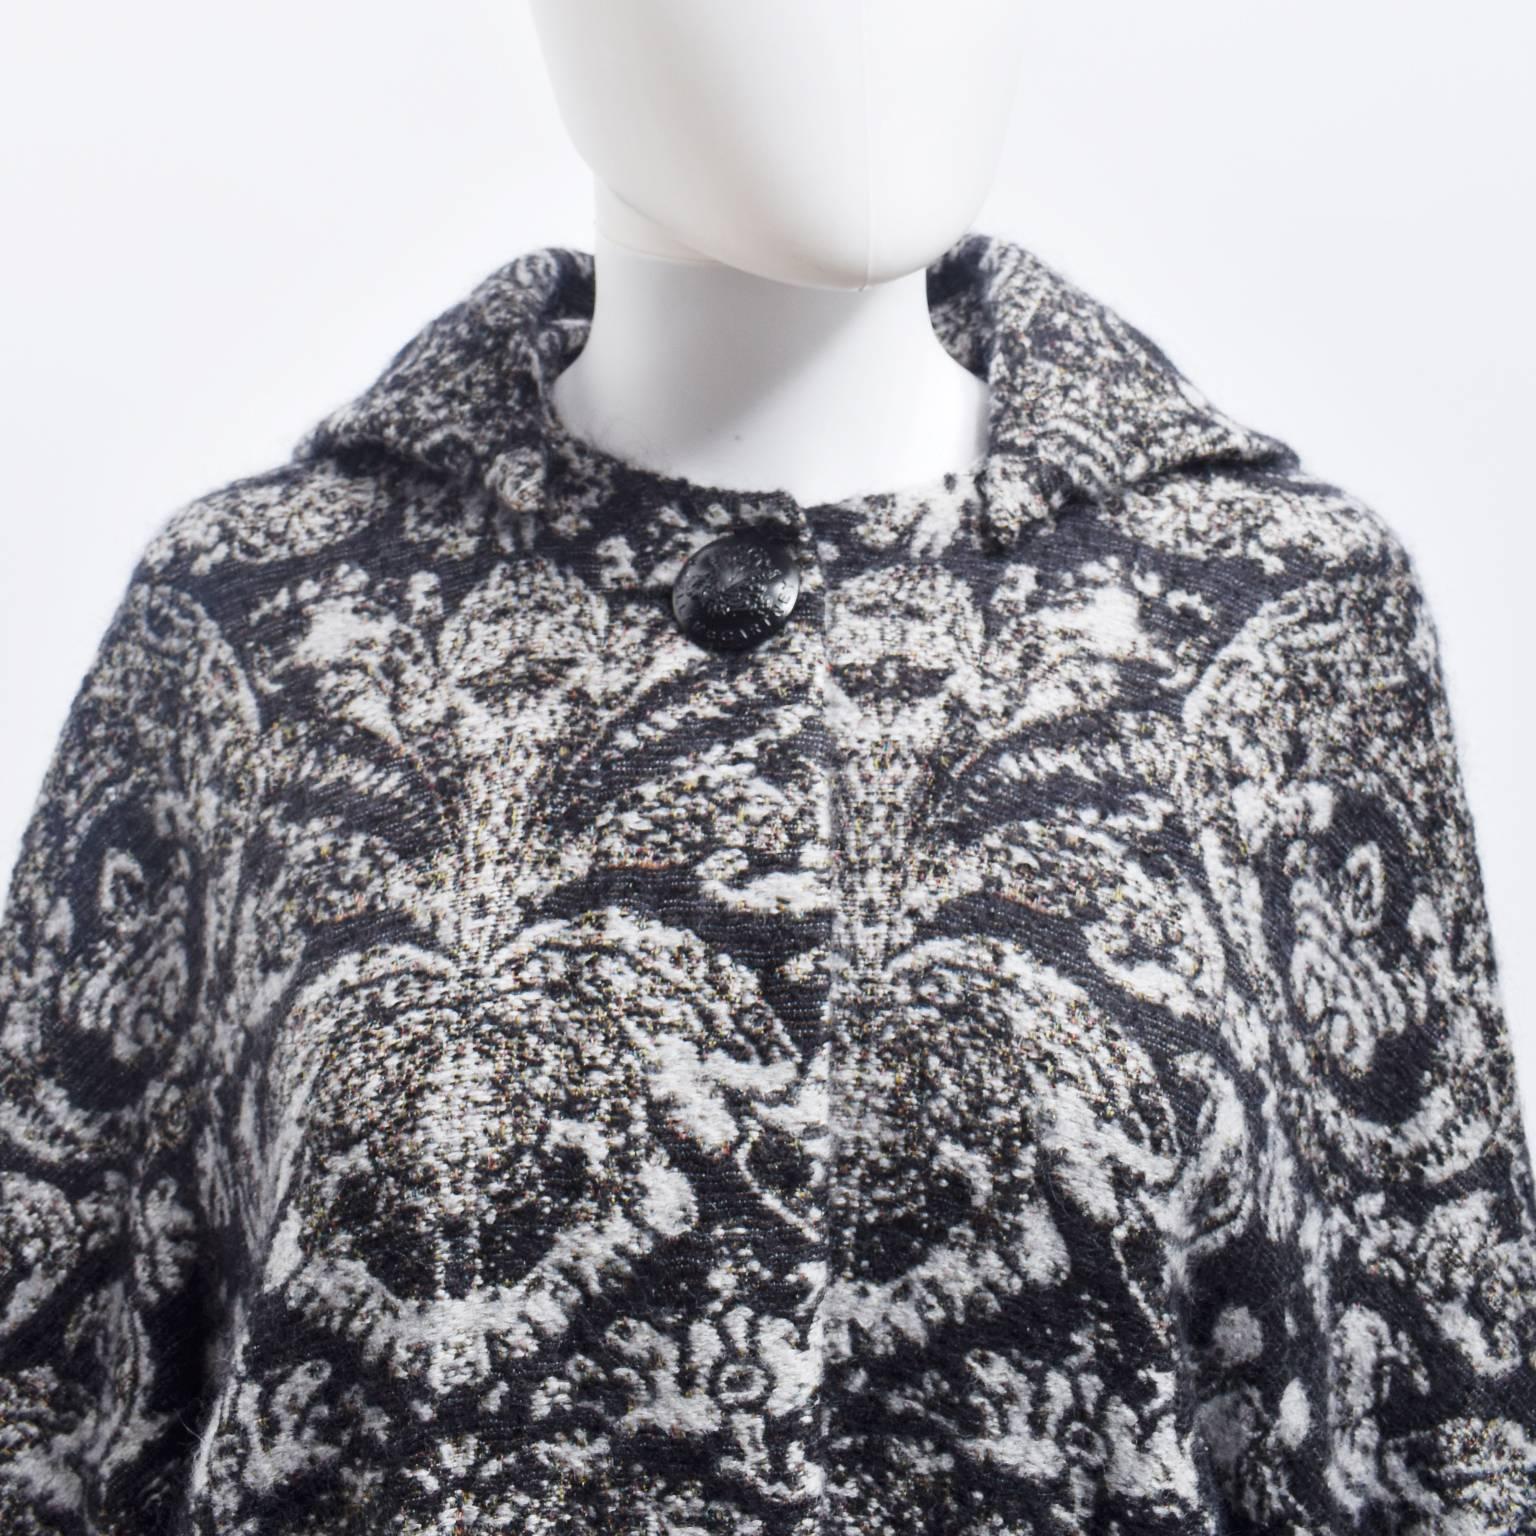 A beautiful brocade cocoon coat from British designer Stella McCartney. The coat has a beautiful oversized shape that has a soft, round shape. In contrast to this, the sleeves have an unusual, geometric shape; a modern twist on a Kimono sleeve. It